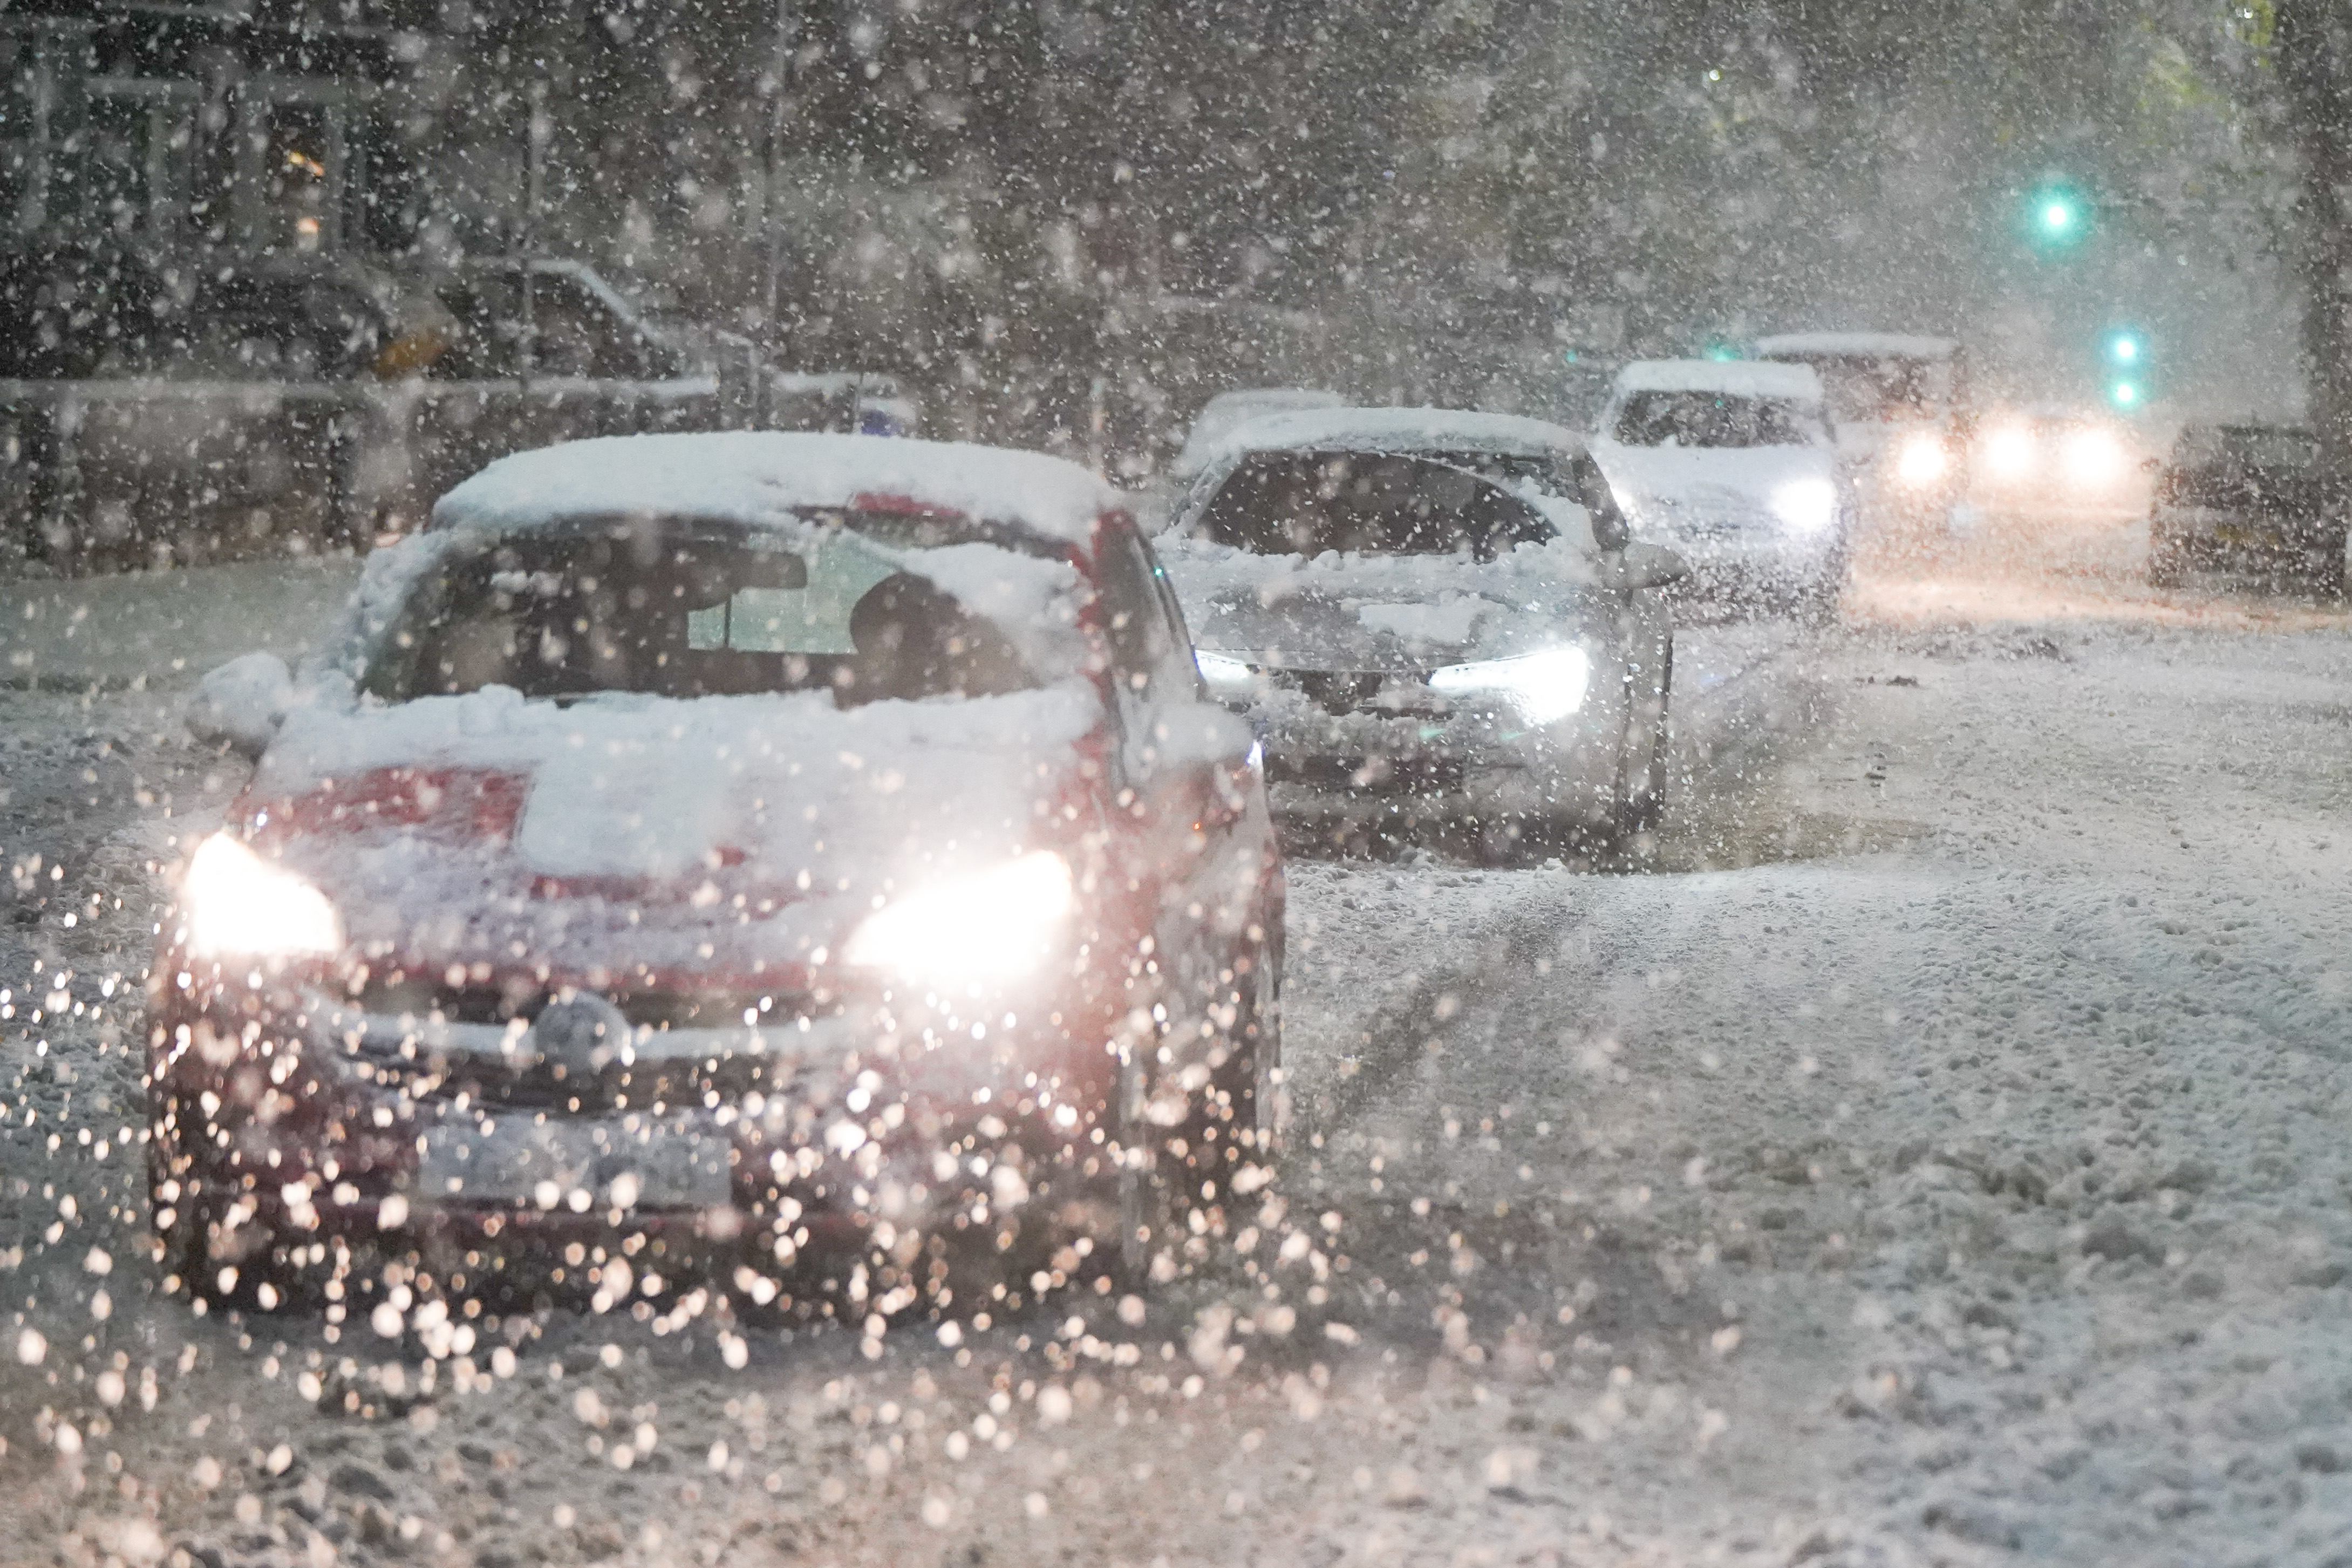 Cars were seen battling through the snow in Sheffield